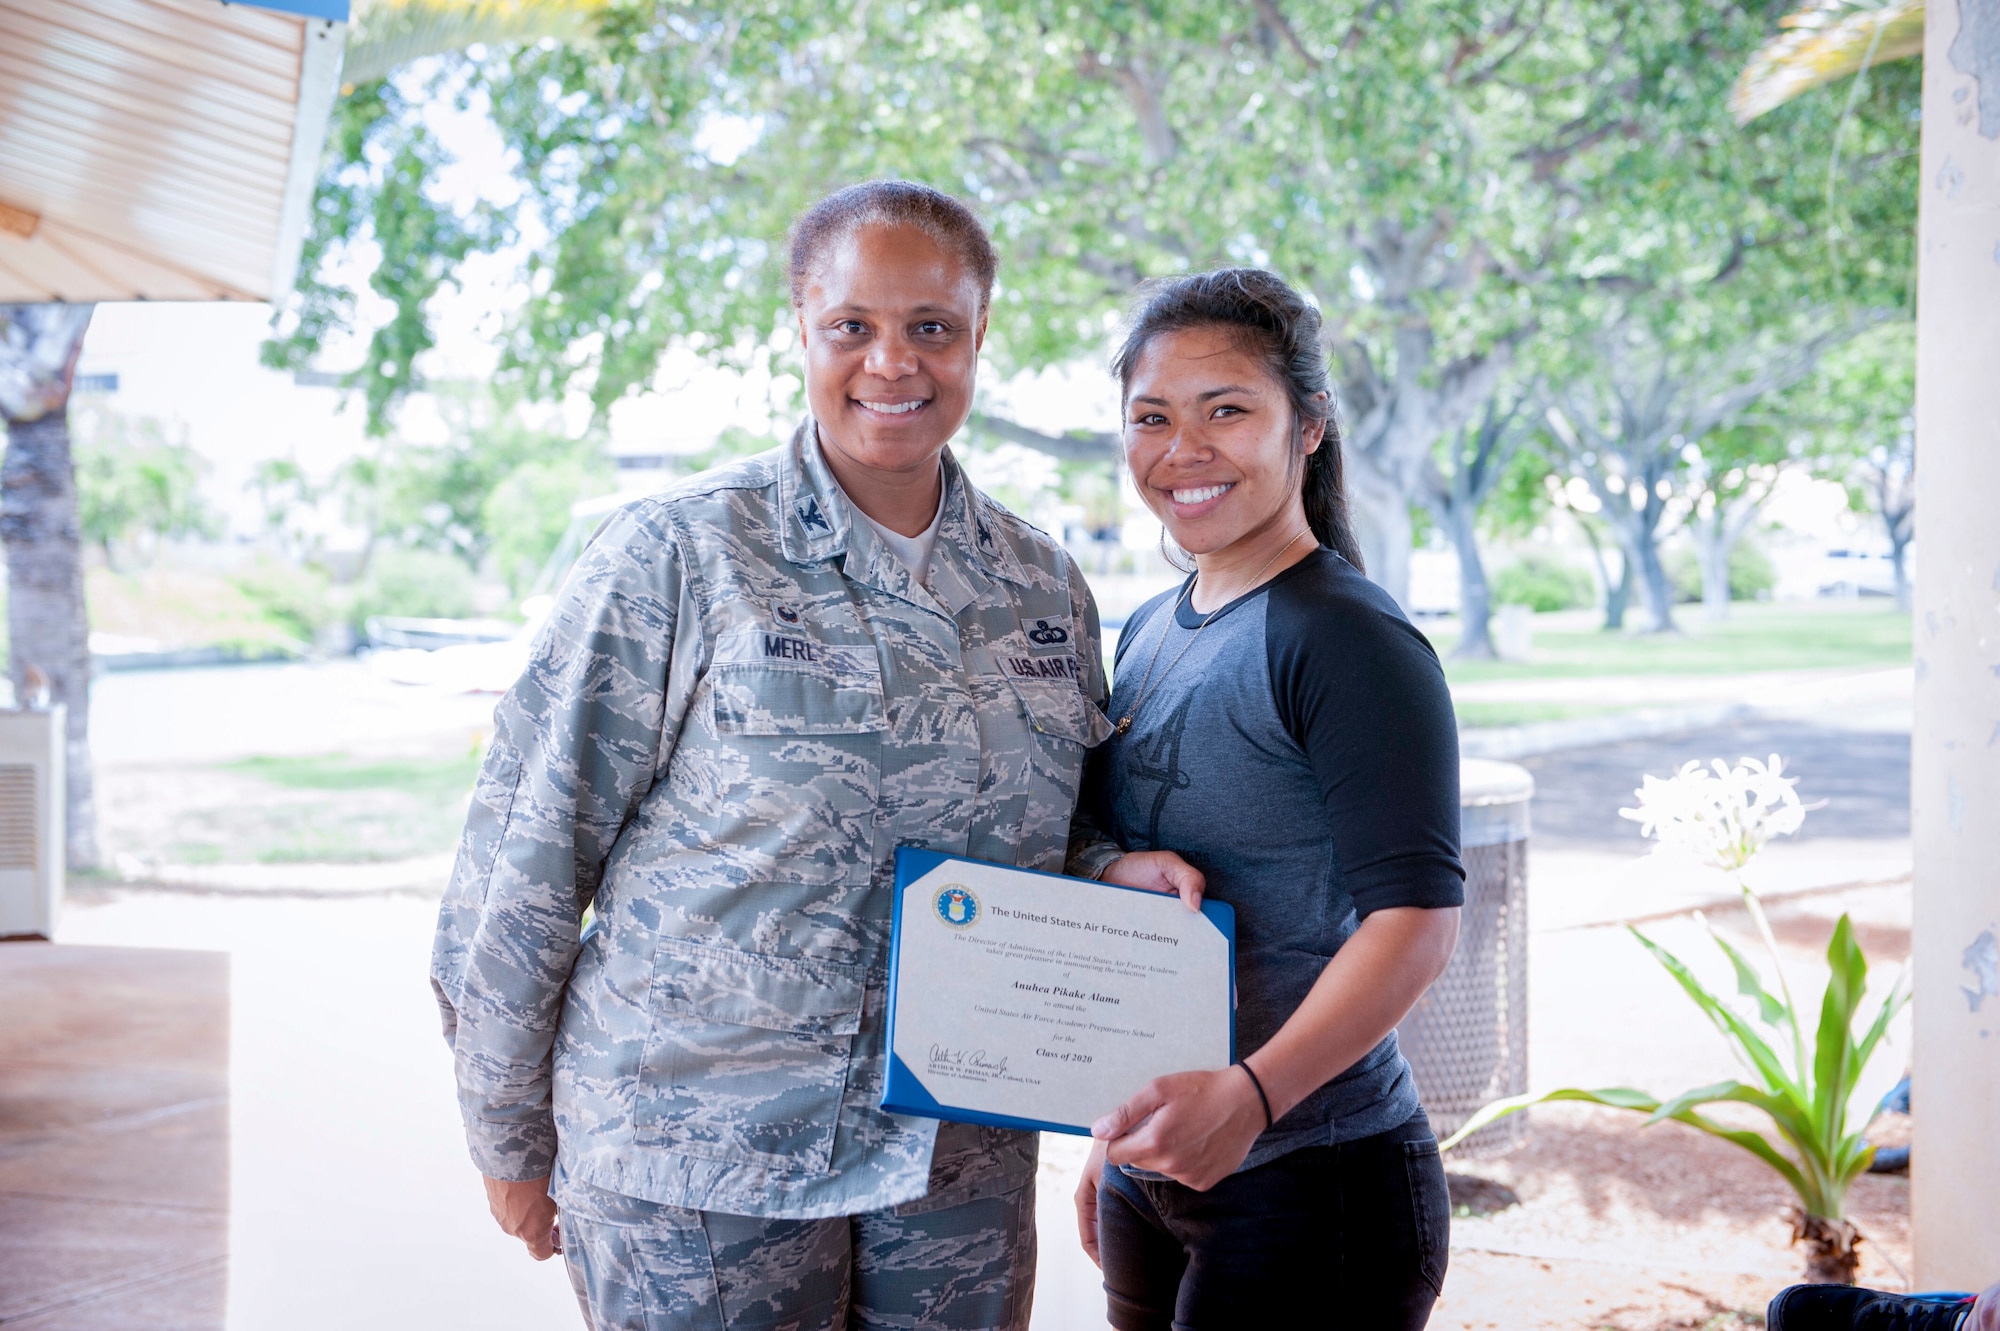 Col. Joyce Merl, 154th Mission Support Group commander, recognizes Airman Anuhea Pikake Alama, 154th Logistics Readiness Squadron materials handler, for her acceptance into the Air Force Academy Preparatory School June 2, 2019, at Joint Base Pearl Harbor-Hickam, Hawaii.